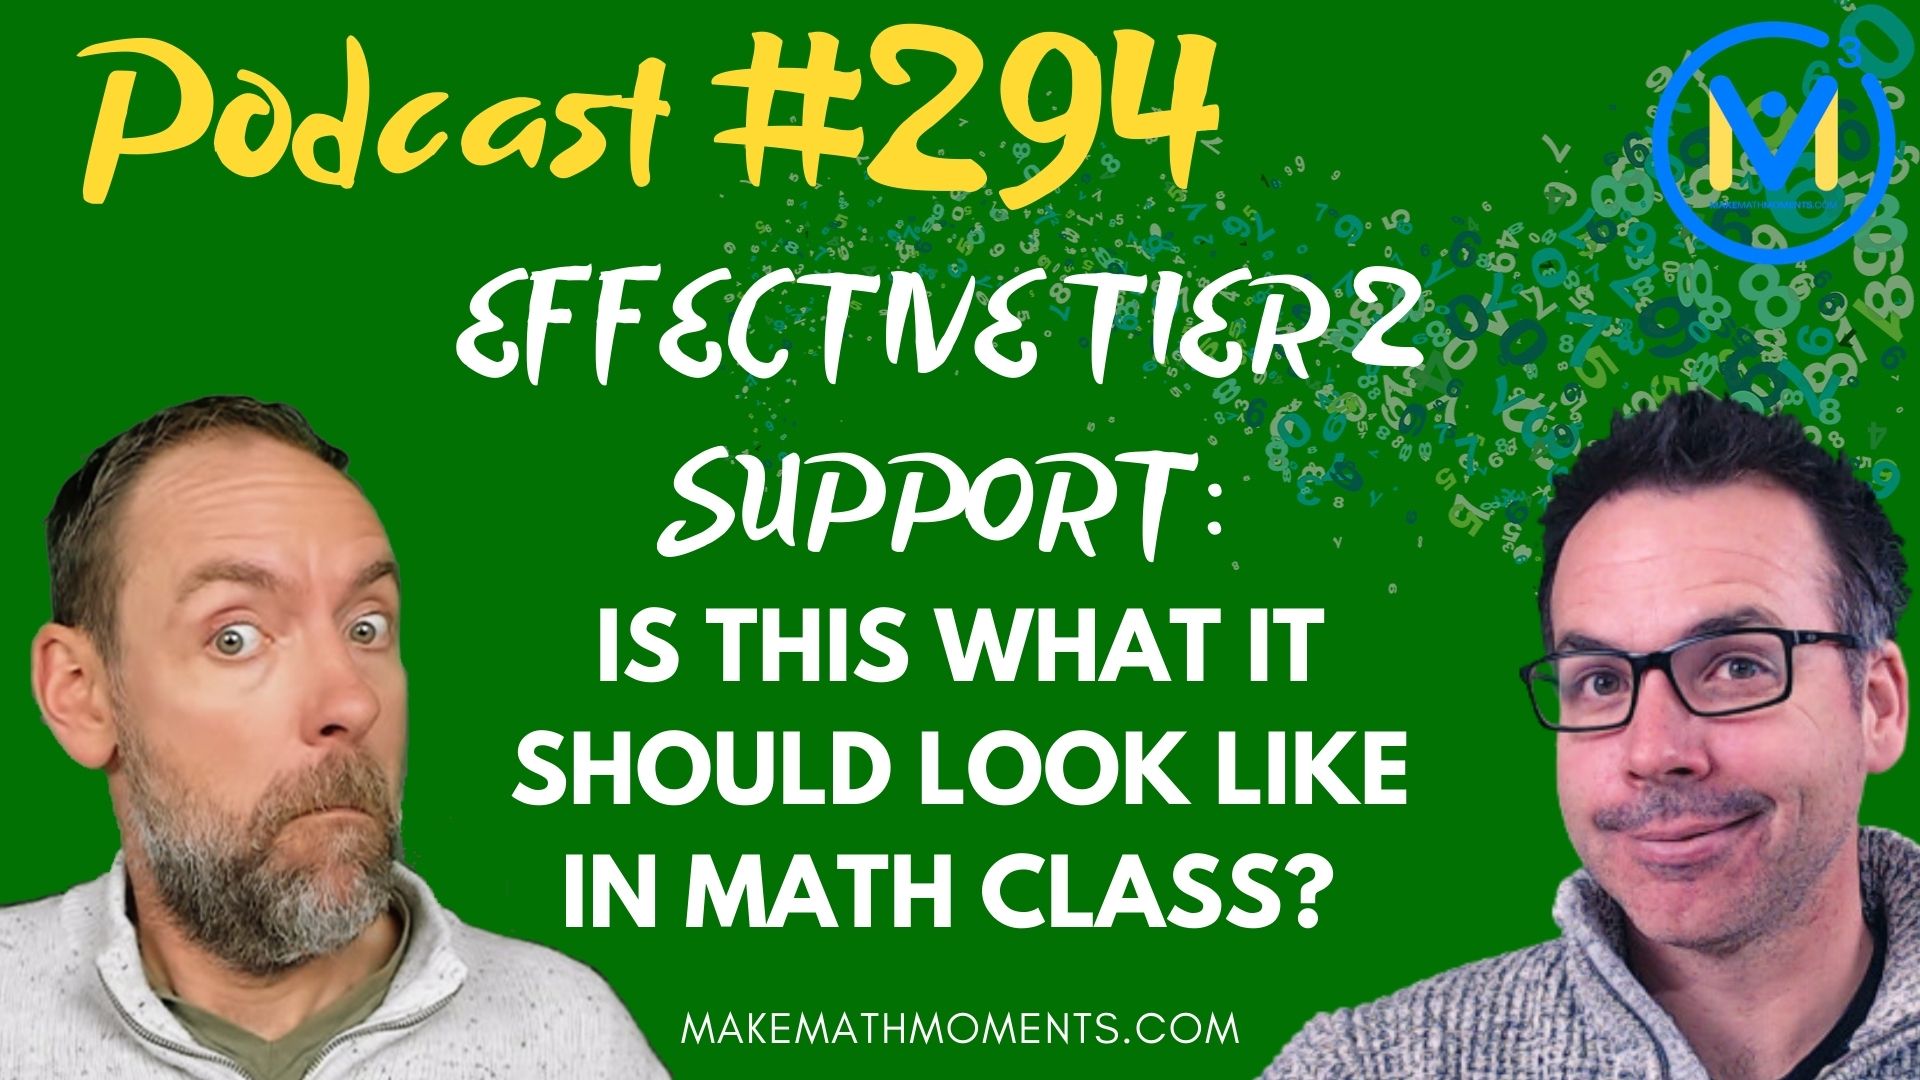 Episode #294: Effective Tier 2 Support: Is This What It Should Look Like In Math Class? – A Math Mentoring Moment